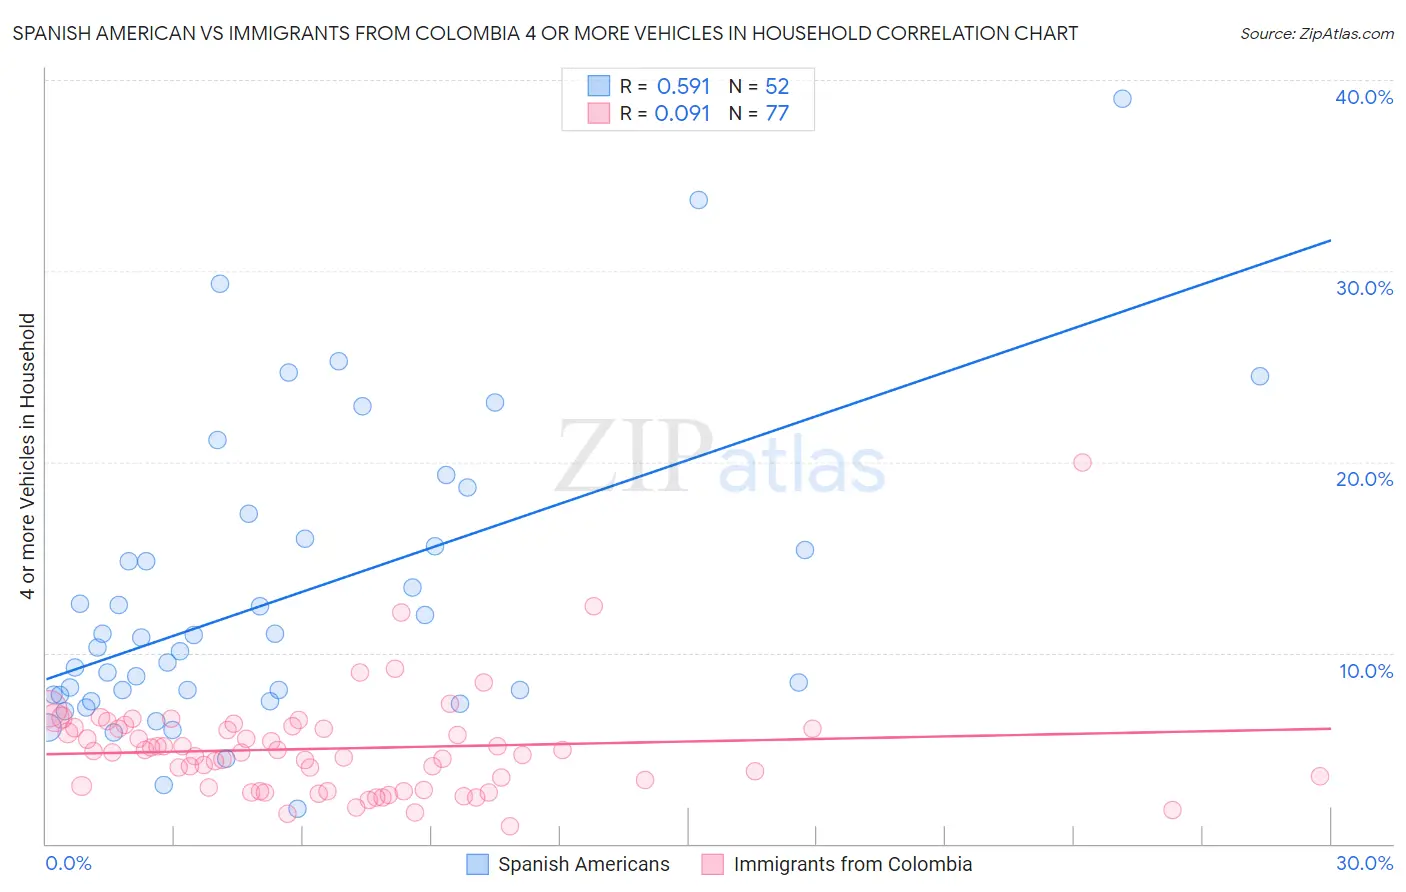 Spanish American vs Immigrants from Colombia 4 or more Vehicles in Household